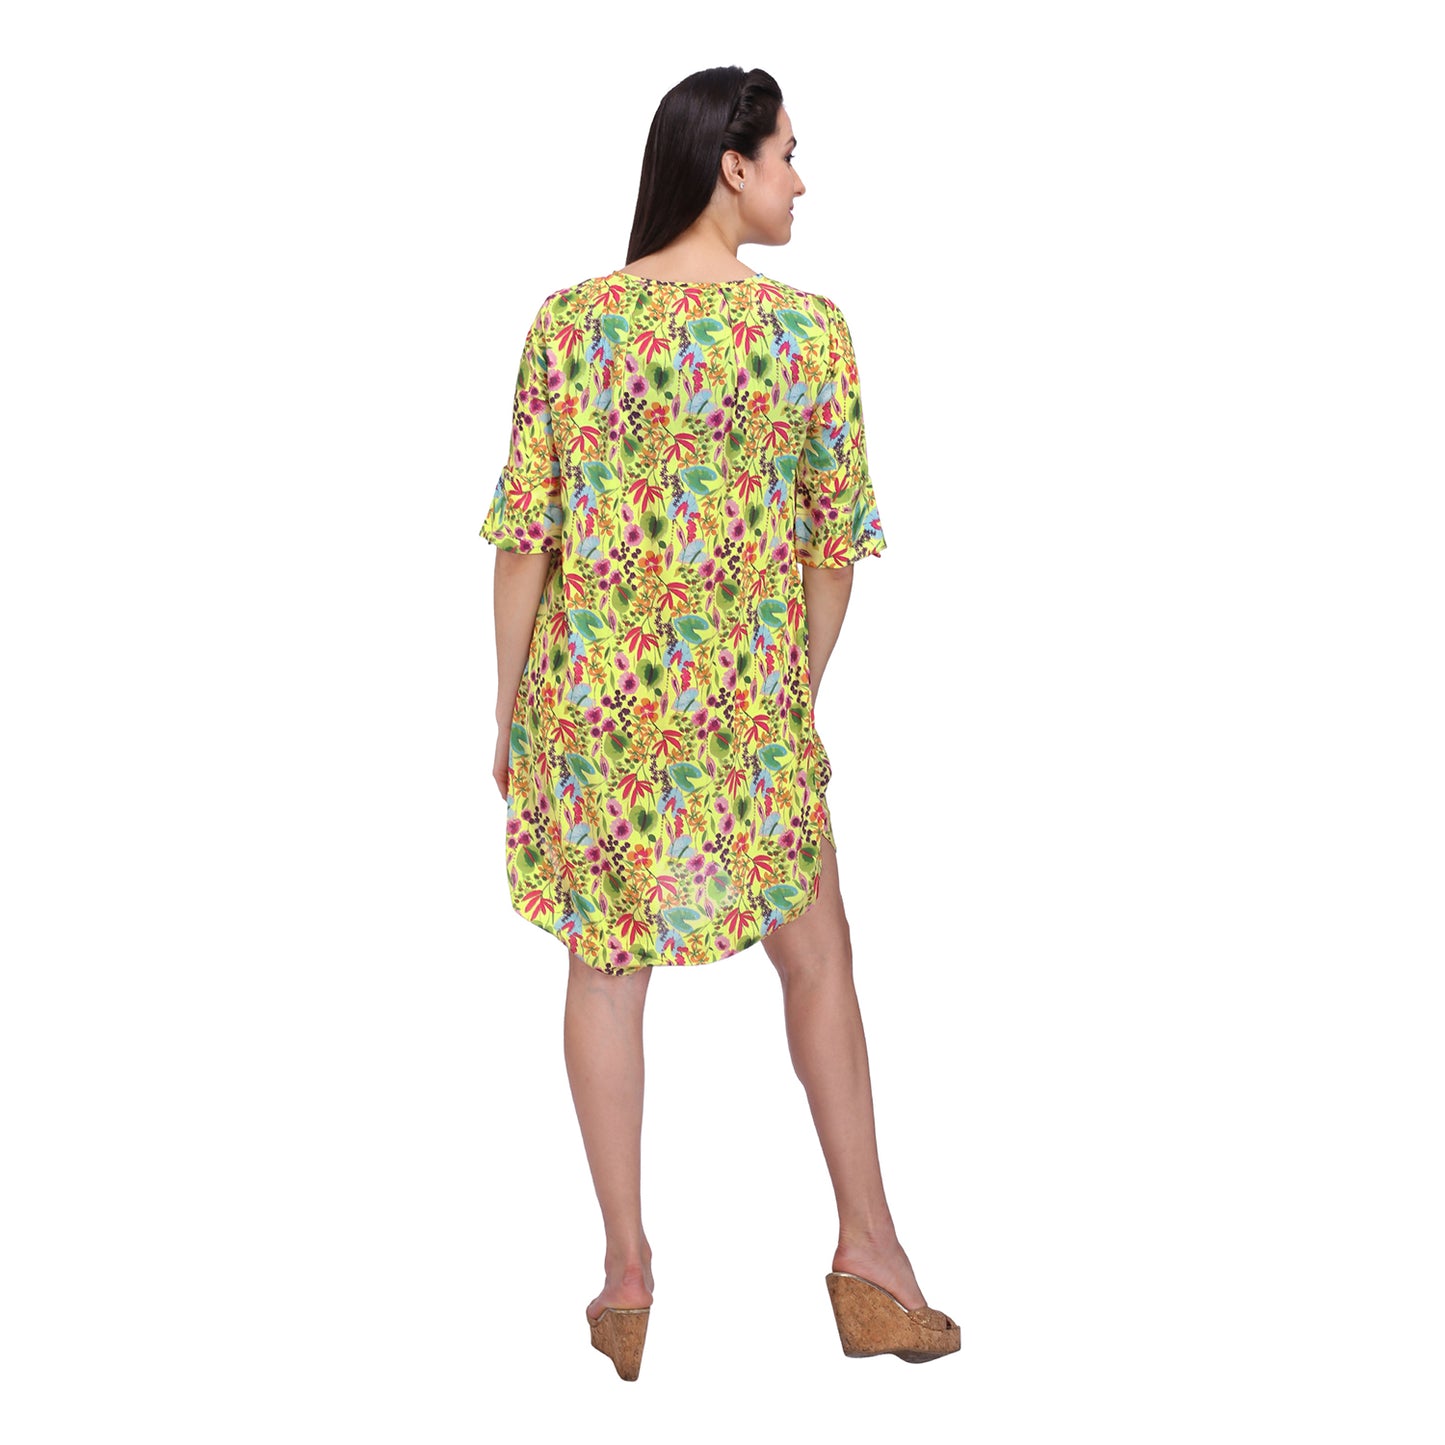 Floral yellow shift dress